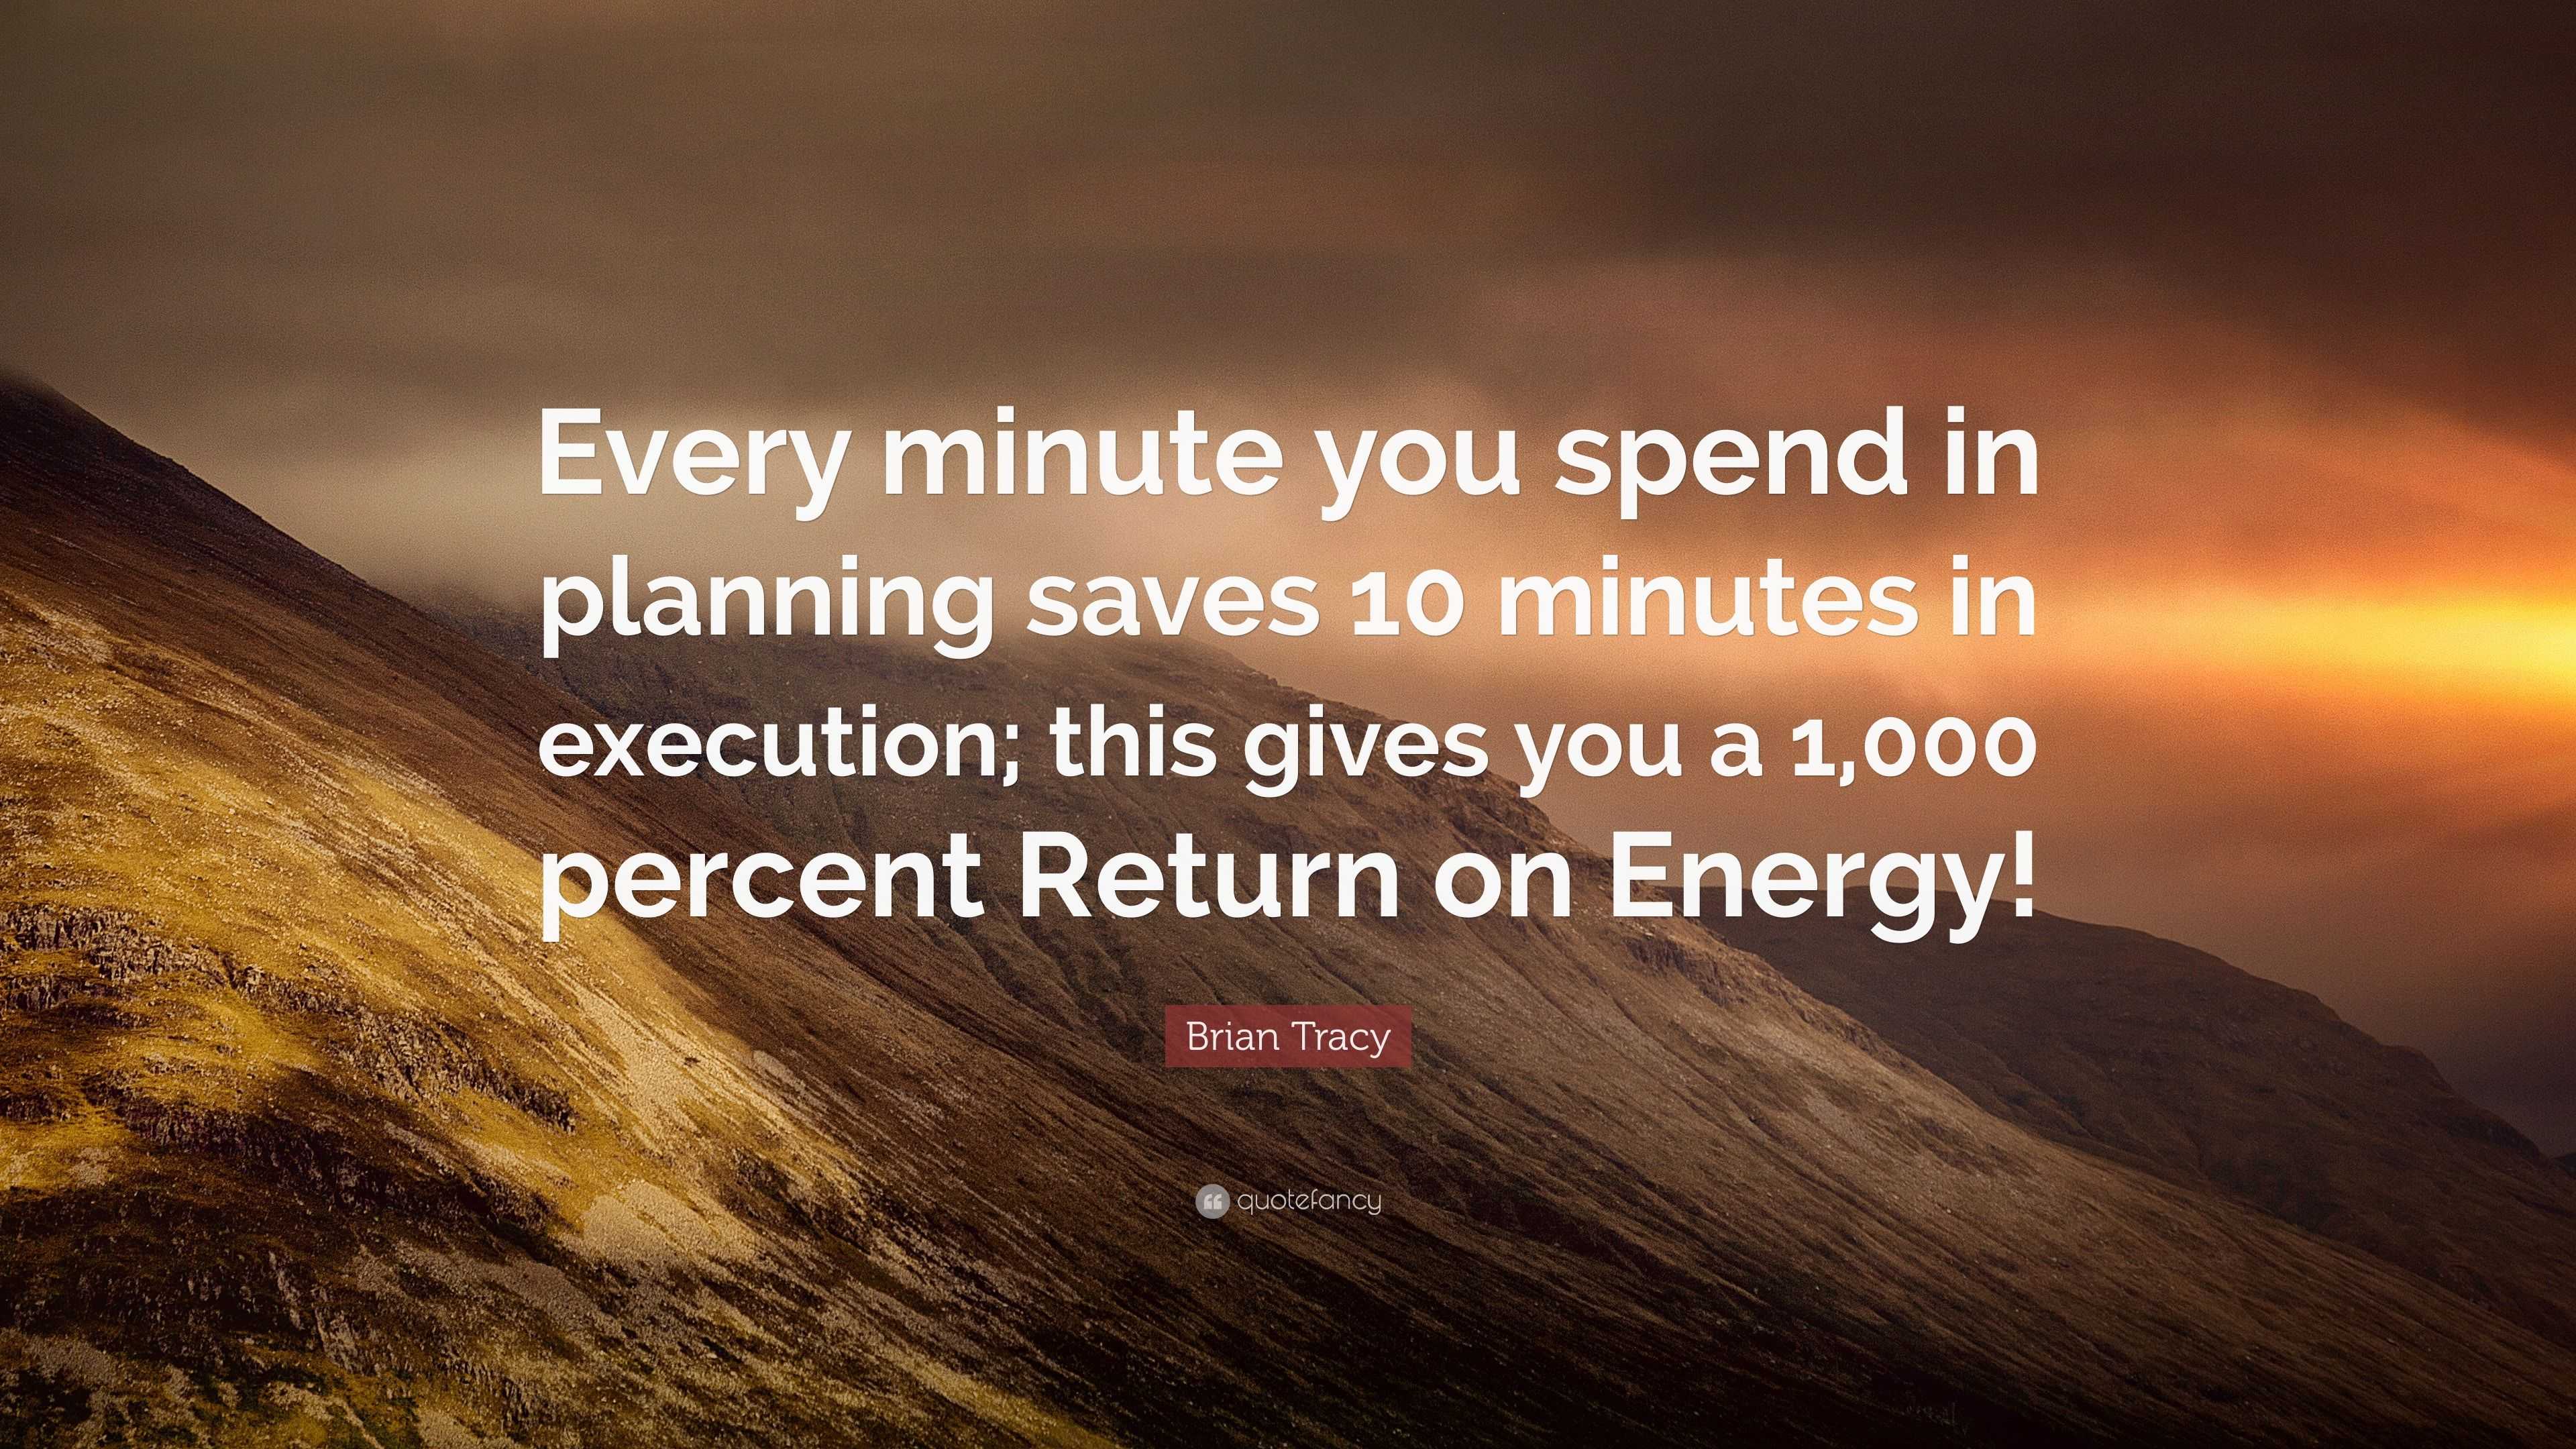 Brian Tracy Quote “Every minute you spend in planning